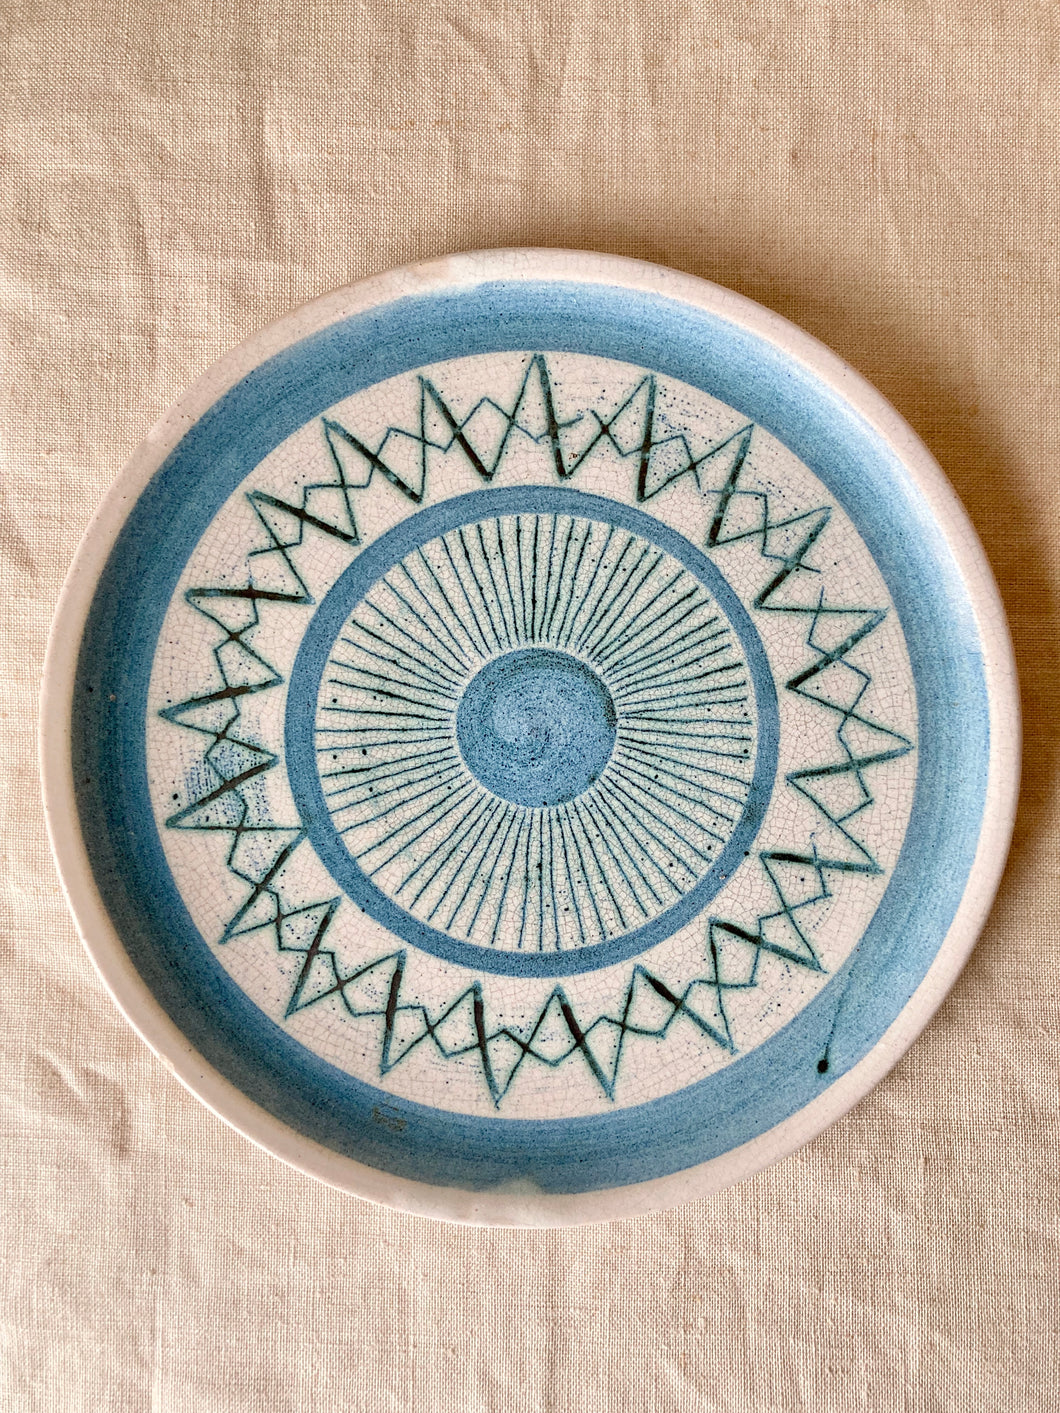 Studio pottery hand decorated plate by Overstone Pottery, Sarisbury